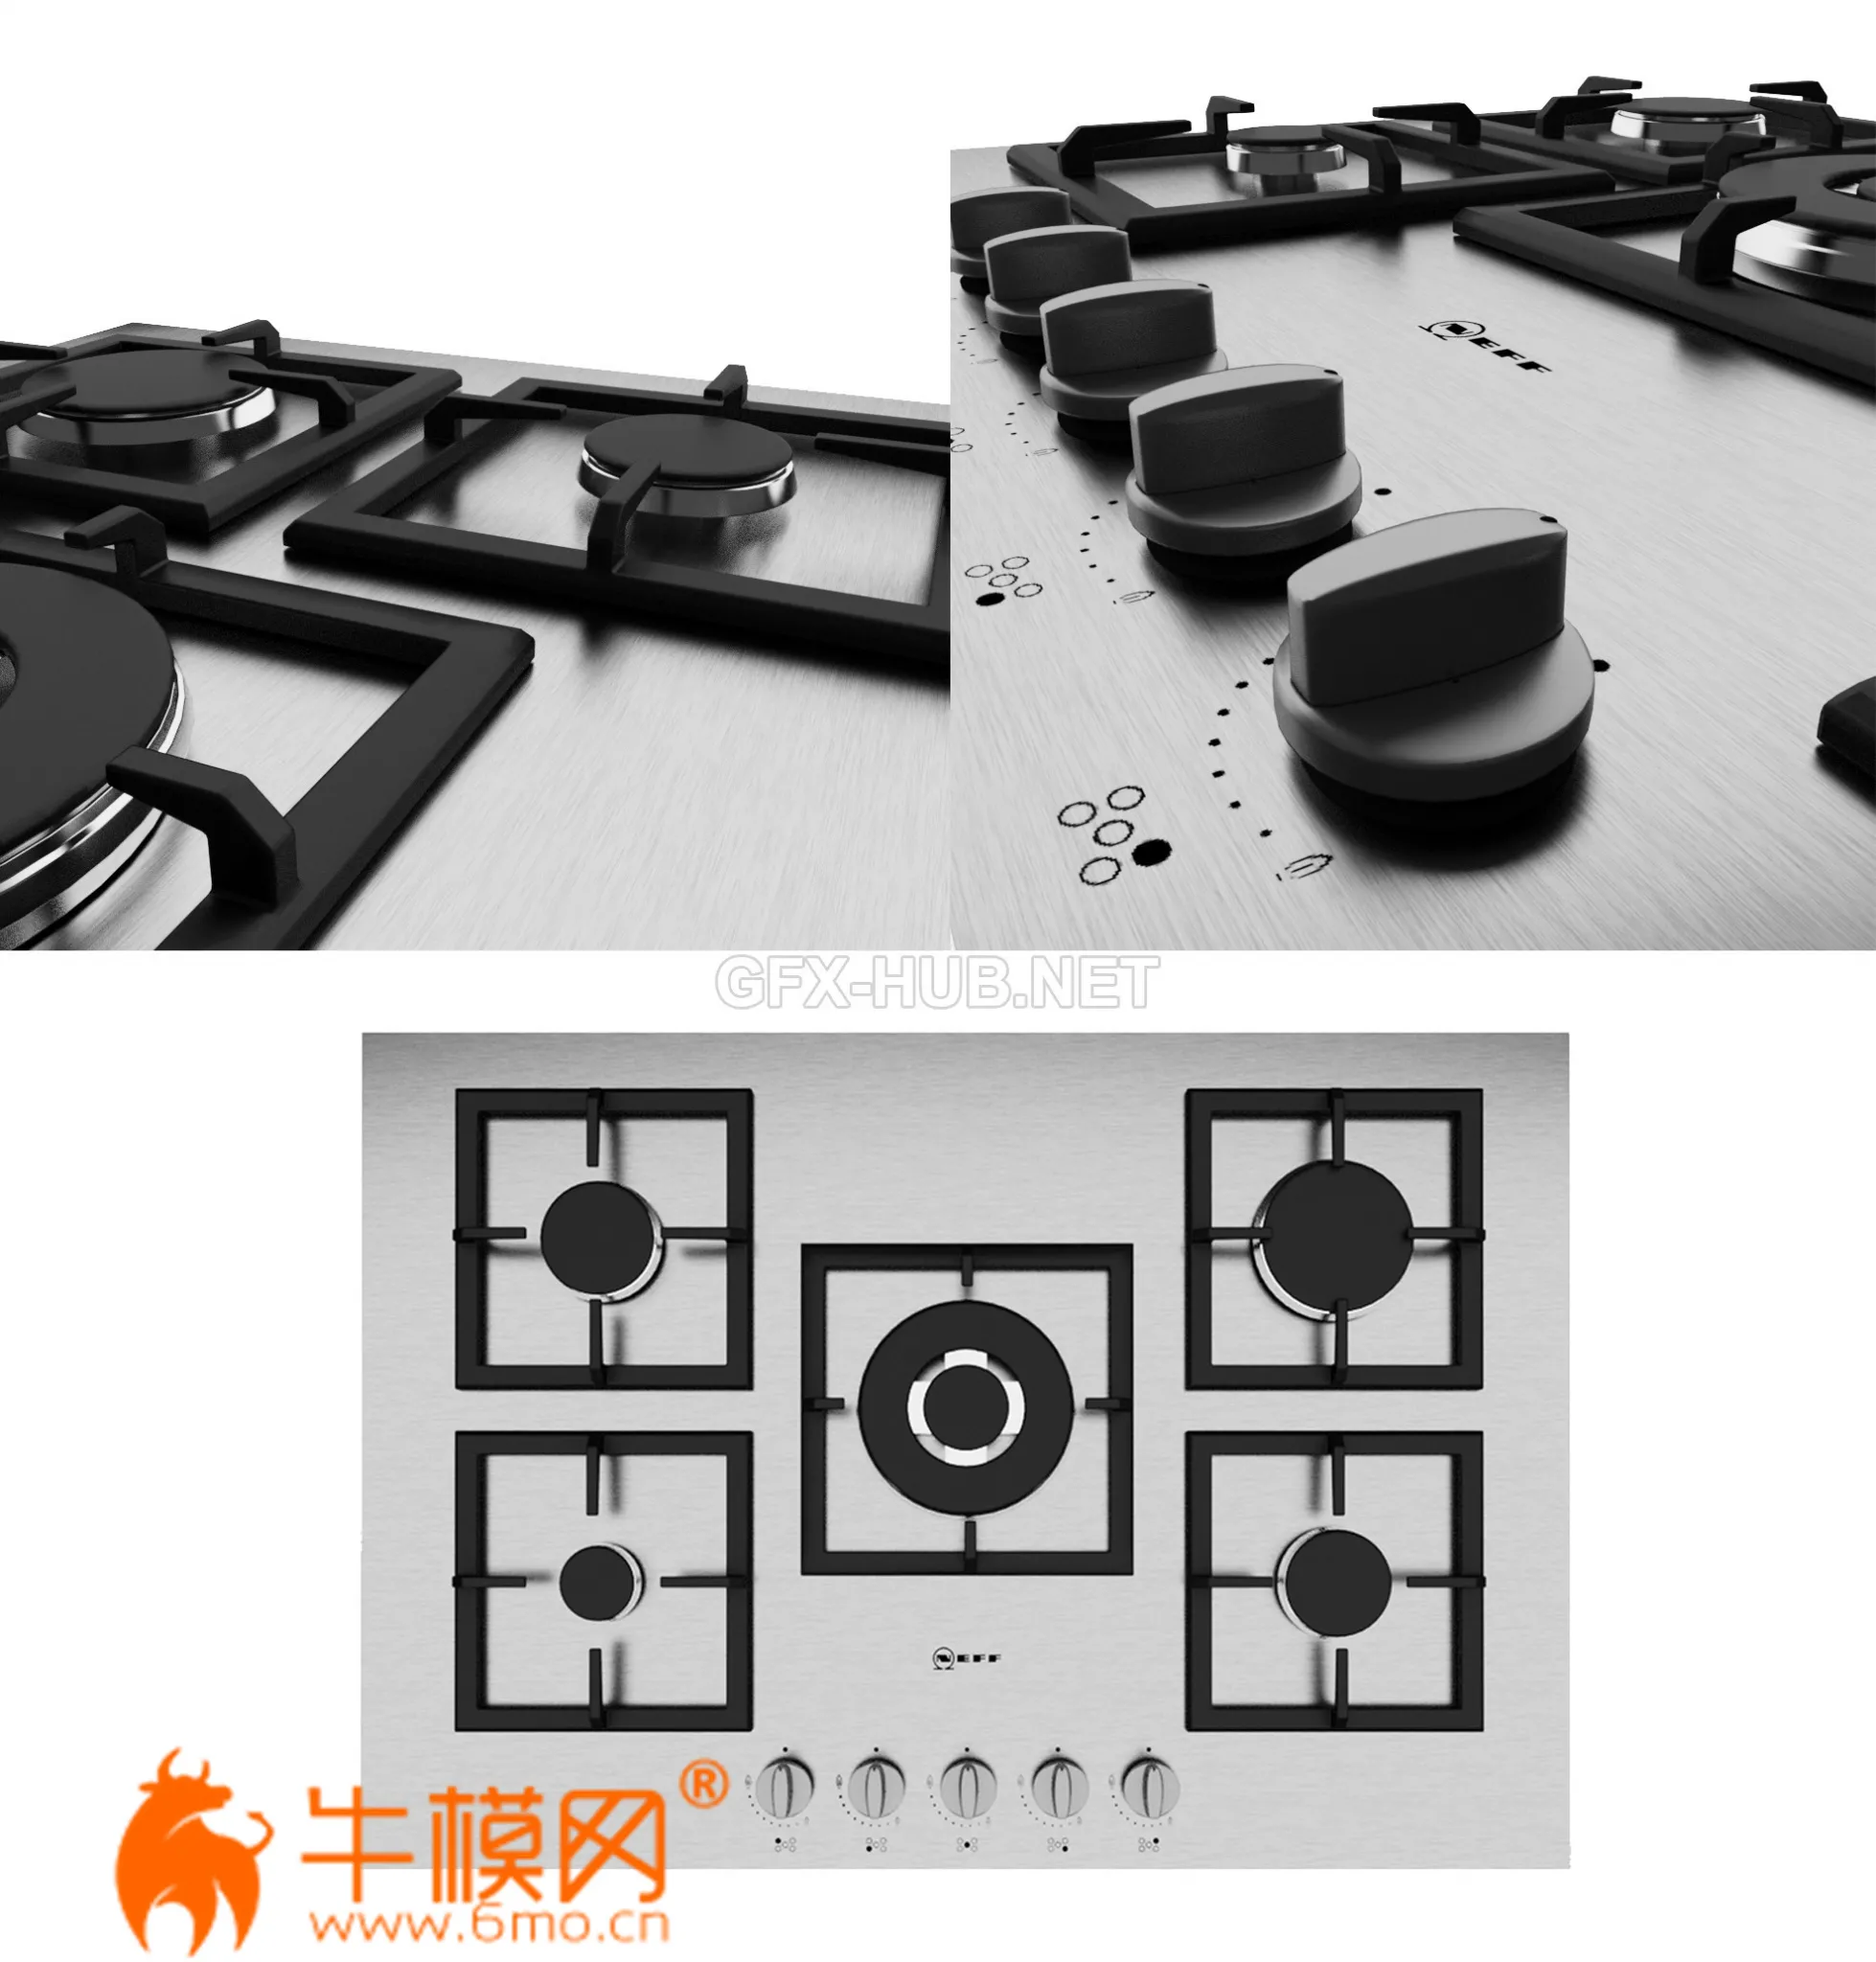 Cooktop T25Z55N1 by NEFF – 1517